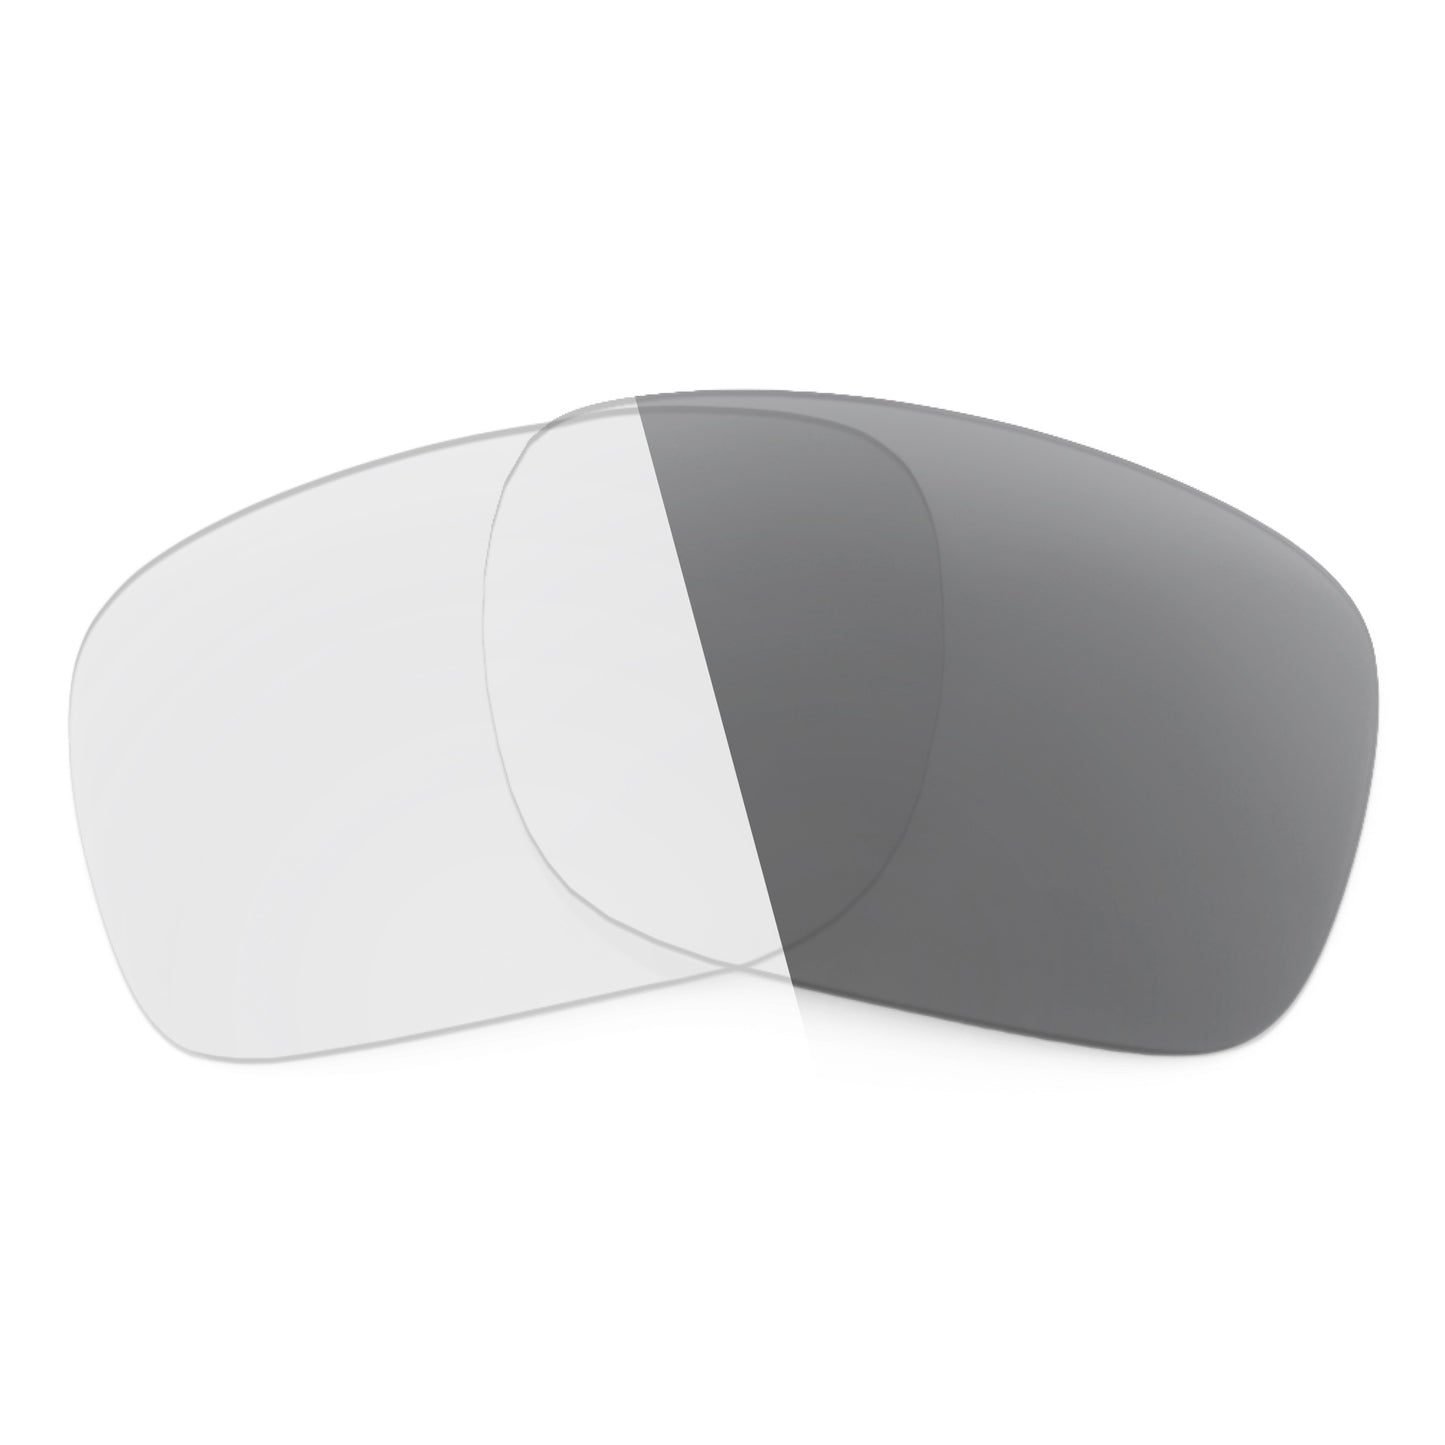 Revant replacement lenses for Ray-Ban Caravan RB3136 58mm Non-Polarized Adapt Gray Photochromic